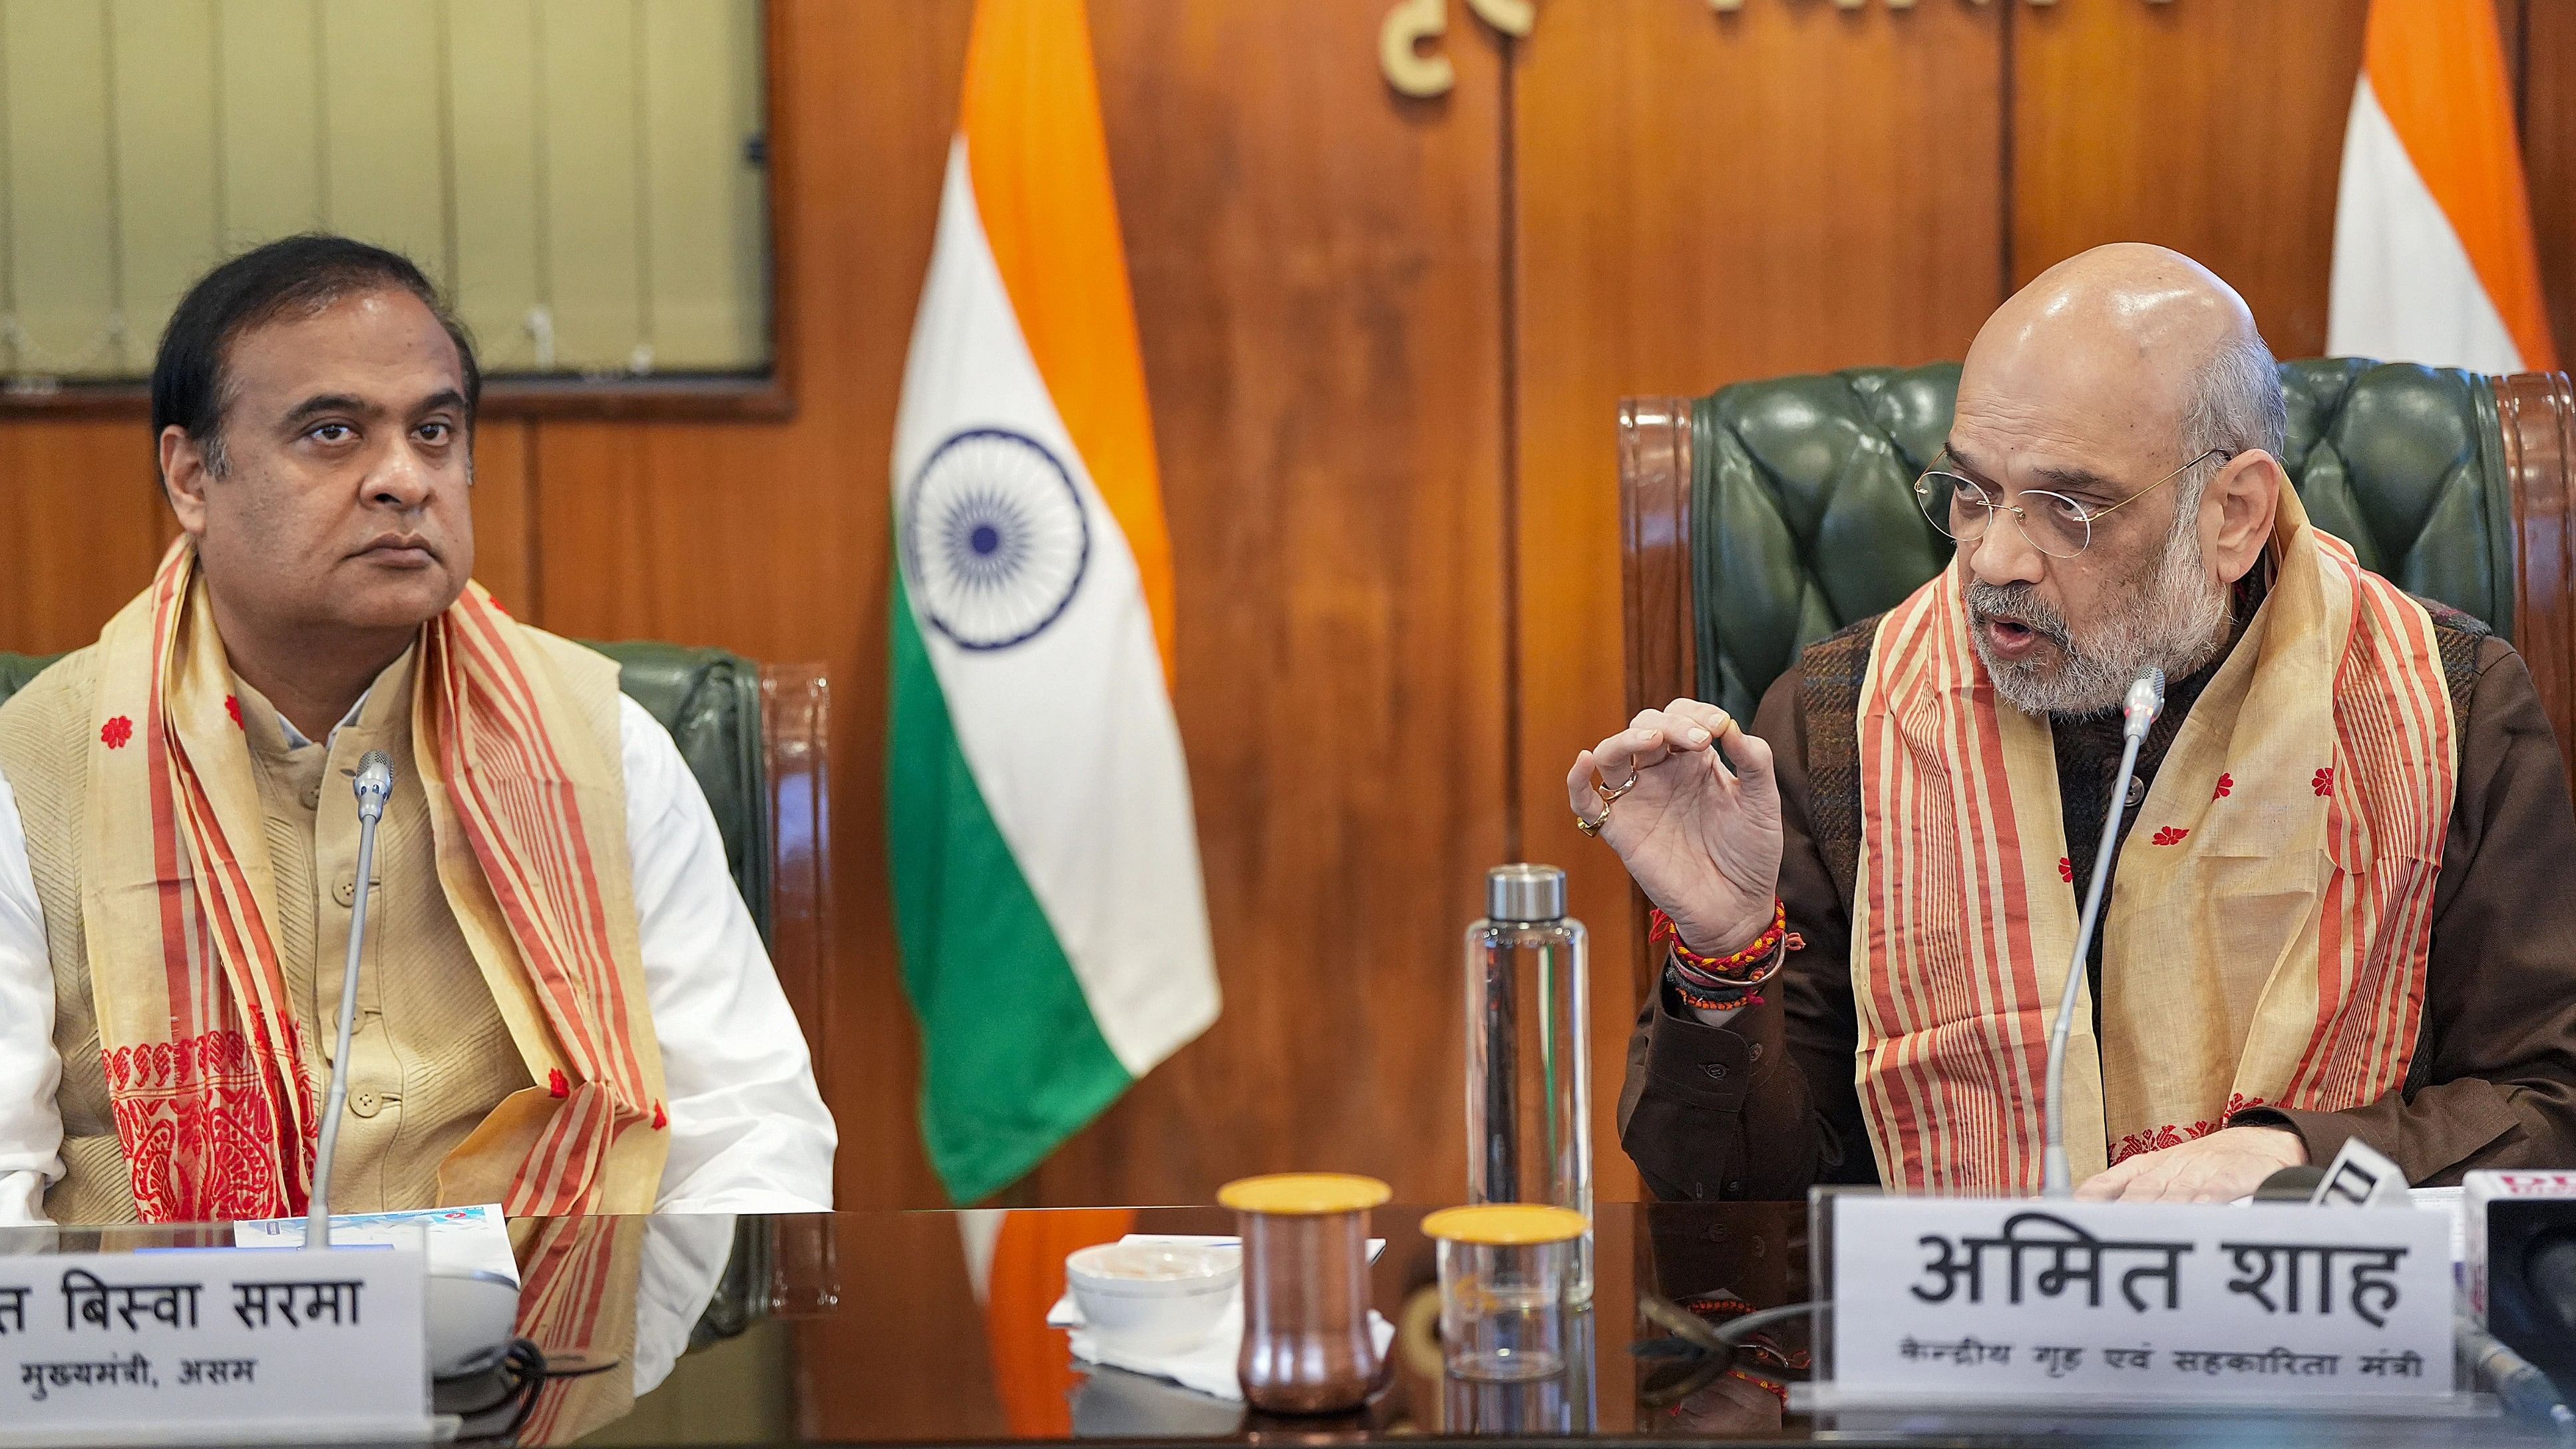 <div class="paragraphs"><p>Union Home Minister Amit Shah with Assam Chief Minister Himanta Biswa Sarma during signing of a peace accord between United Liberation Front of Asom (ULFA) and the central and Assam governments, in New Delhi.</p></div>